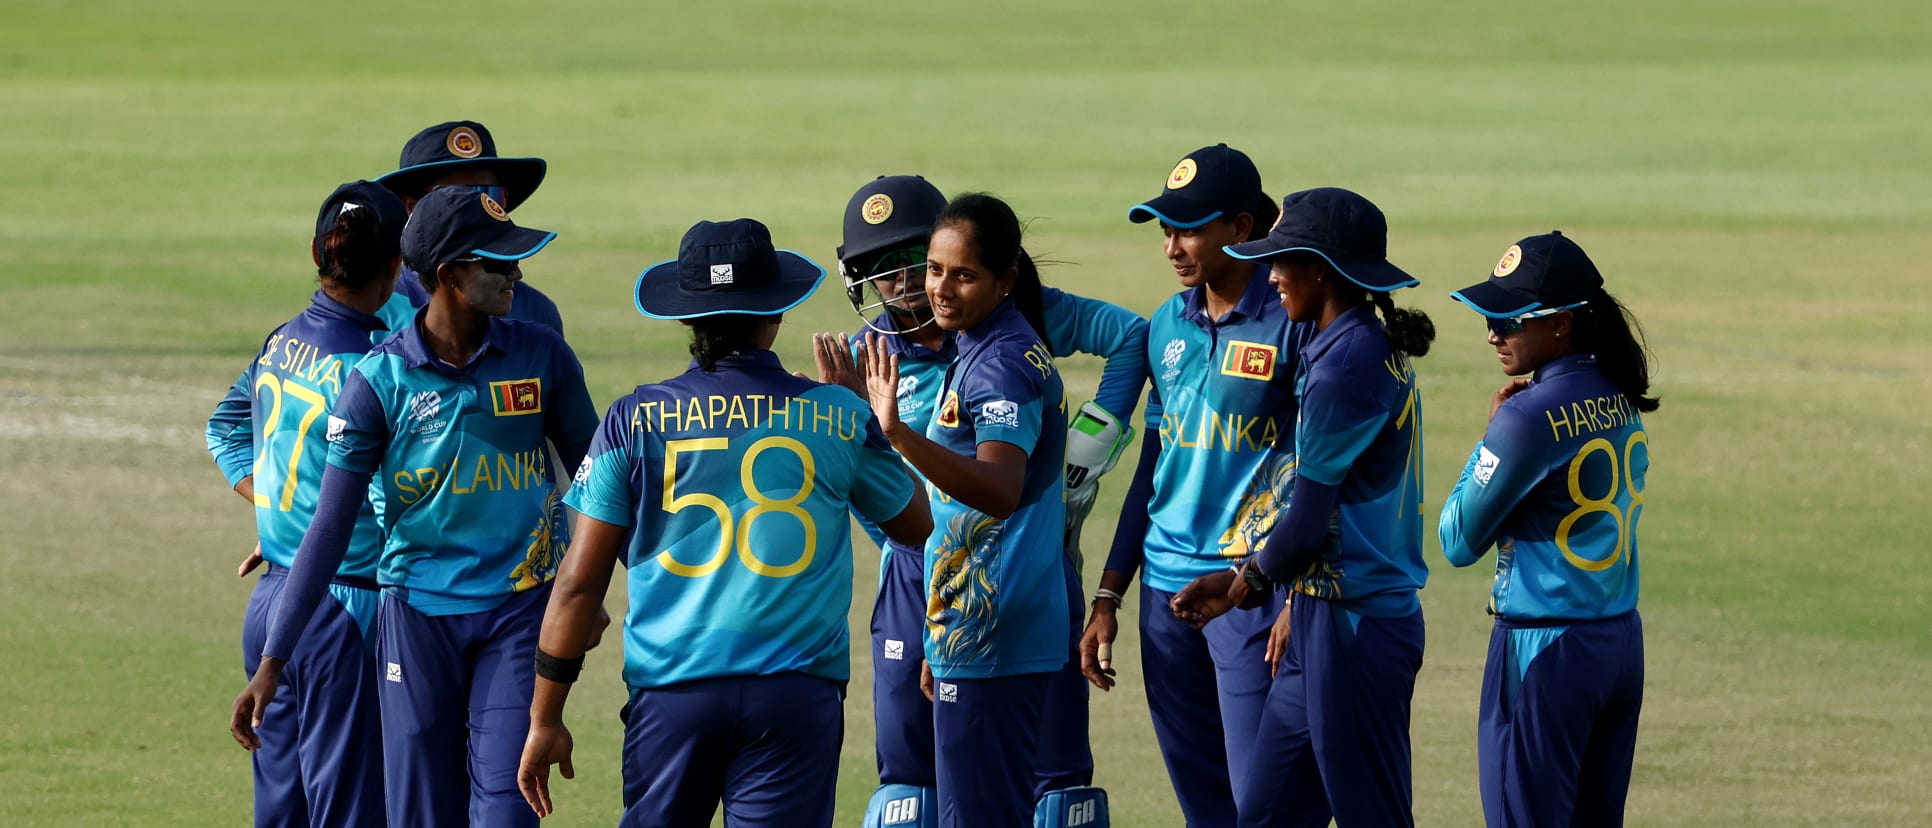 Sri Lanka confirm Group A semi-final spot; Netherlands push for top finish in Group B